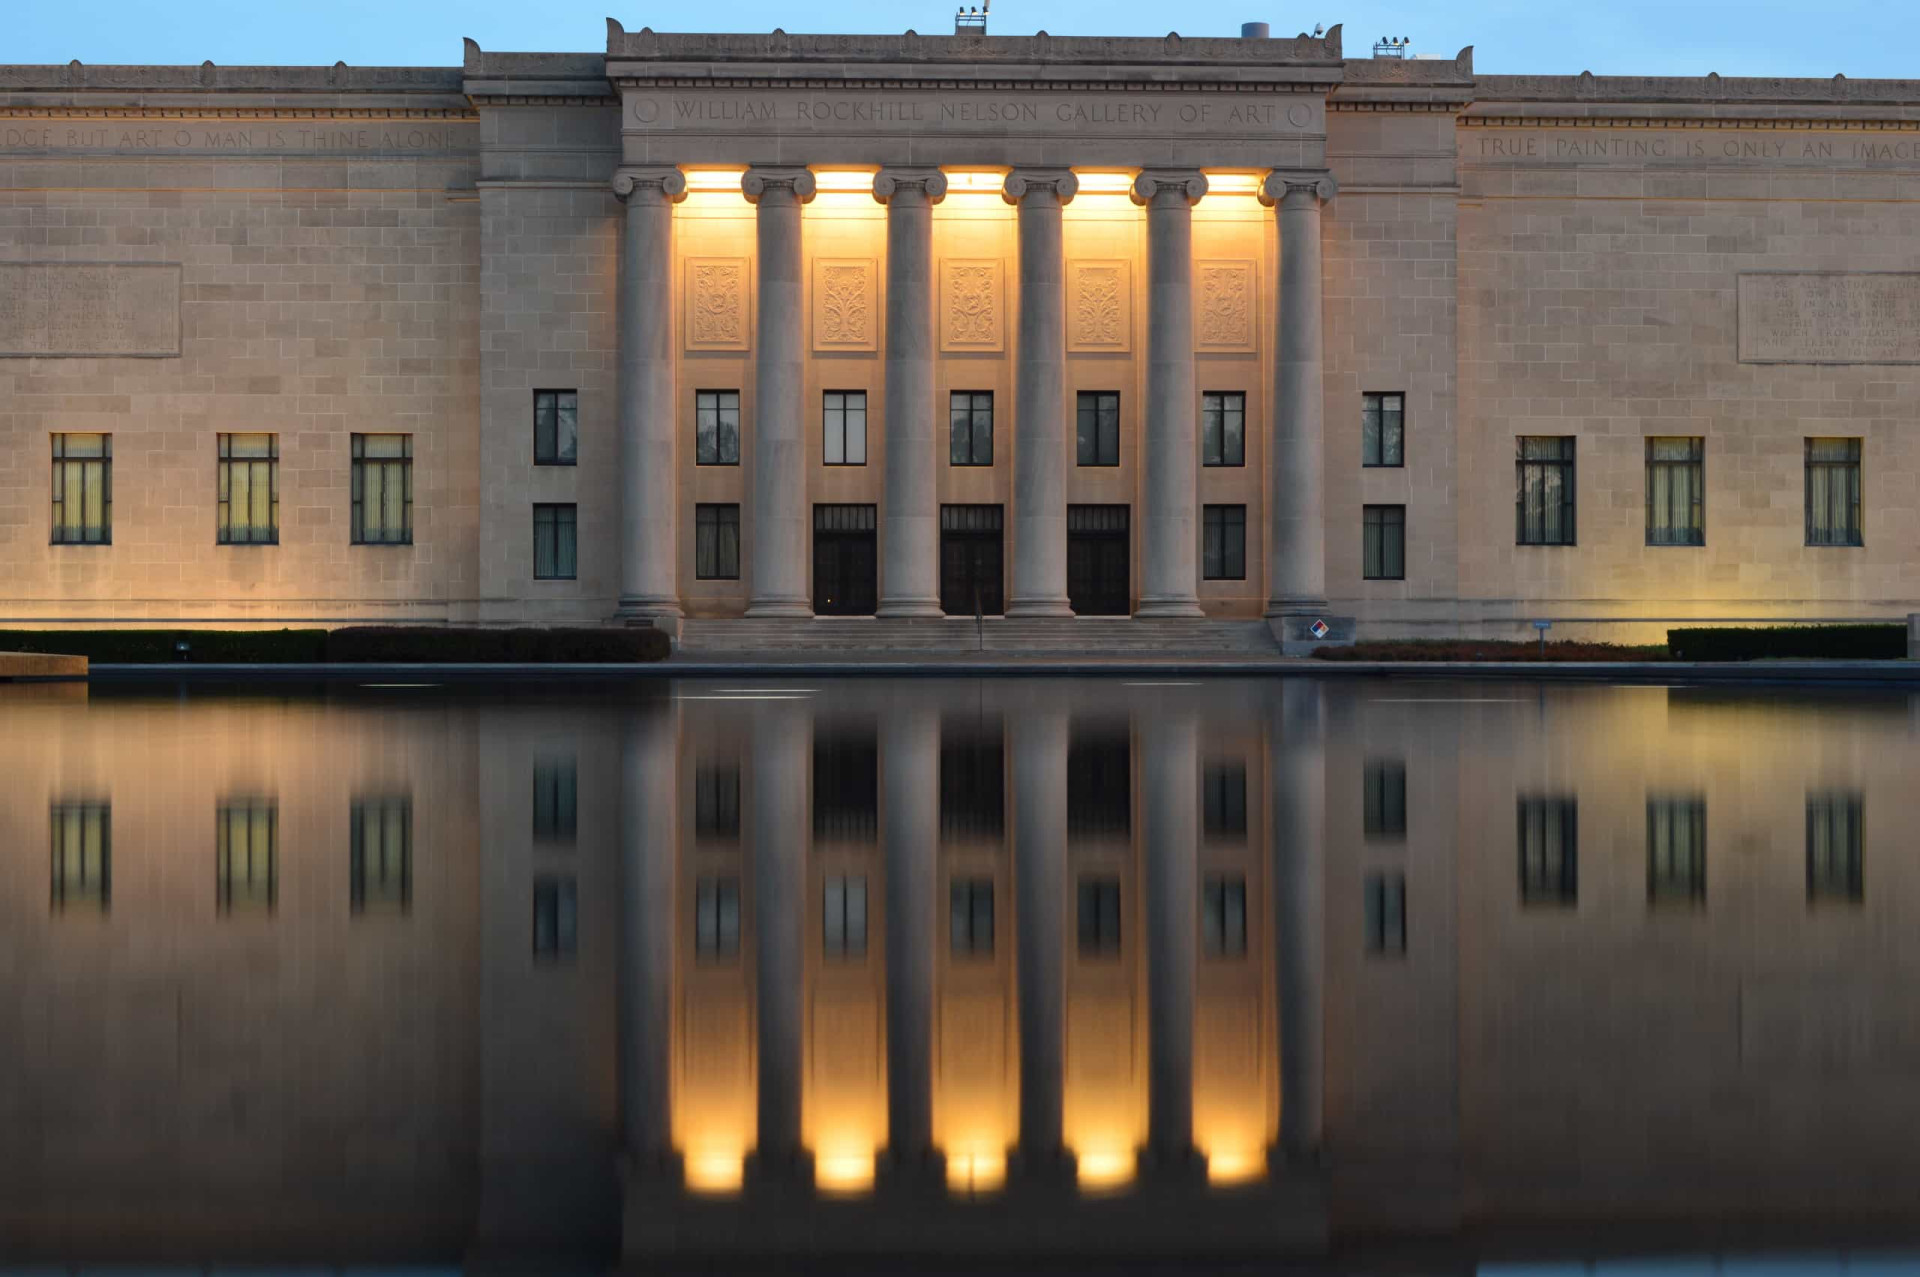 <p>Missouri's top destination for culture vultures, the Nelson-Atkins Museum of Art in Kansas City is a treasure trove of art exhibits from around the world. Featuring stellar permanent displays as well as touring exhibitions from major artists such as Van Gogh and Degas, it's unmissable for any arts enthusiast.</p><p>You may also like:<a href="https://www.starsinsider.com/n/466415?utm_source=msn.com&utm_medium=display&utm_campaign=referral_description&utm_content=486112v1en-us"> From crocs to cannibals: the world's deadliest rivers</a></p>